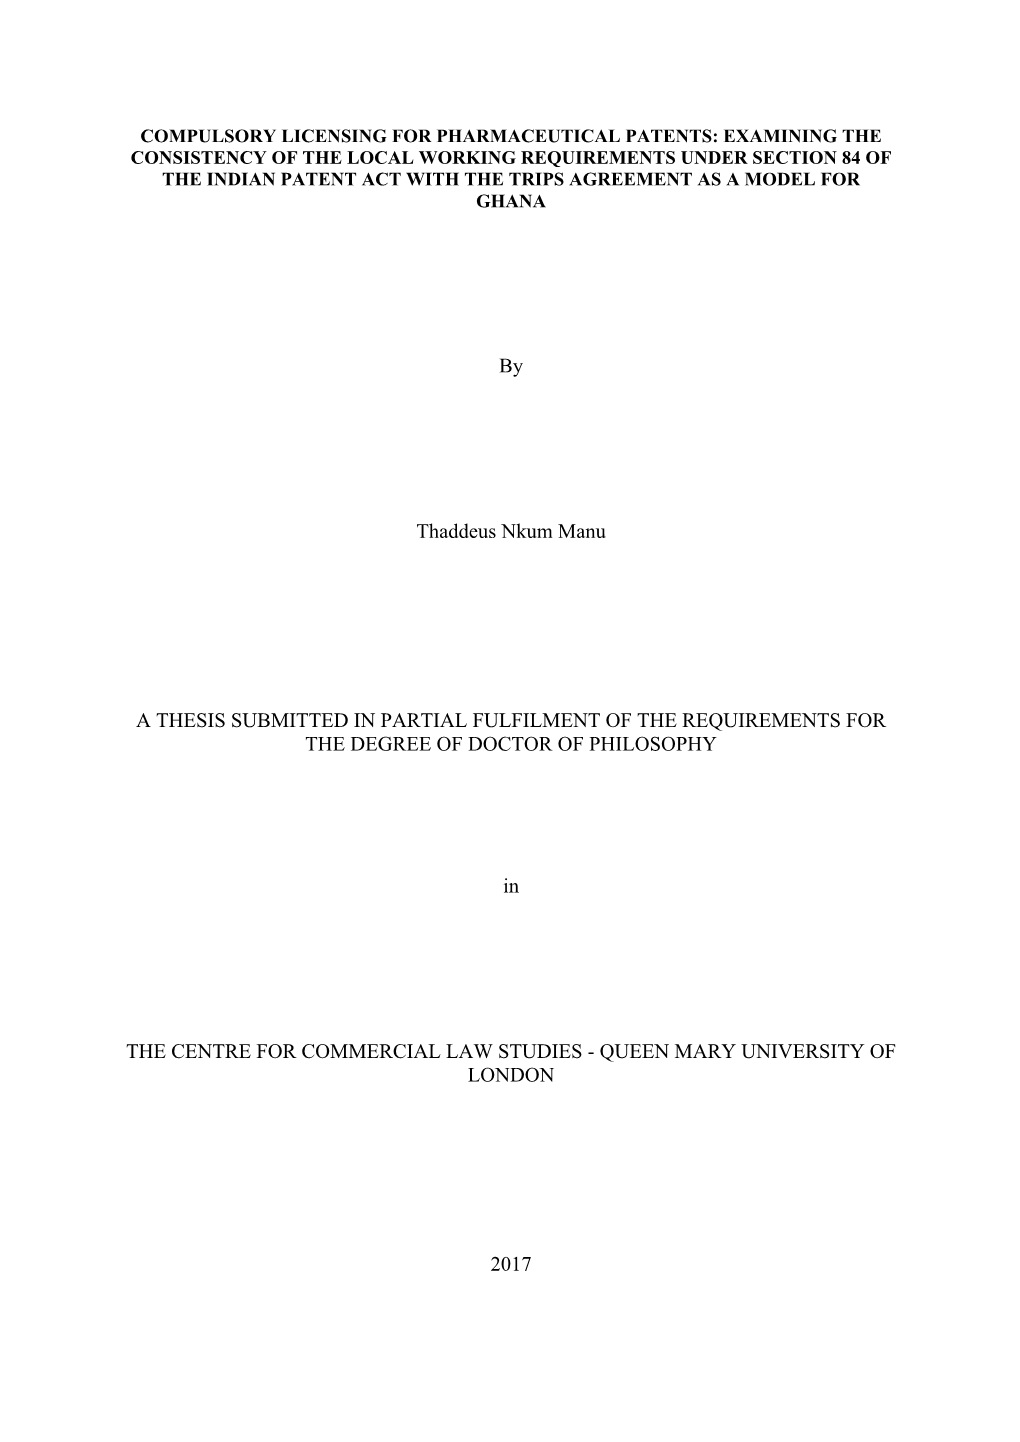 By Thaddeus Nkum Manu a THESIS SUBMITTED in PARTIAL